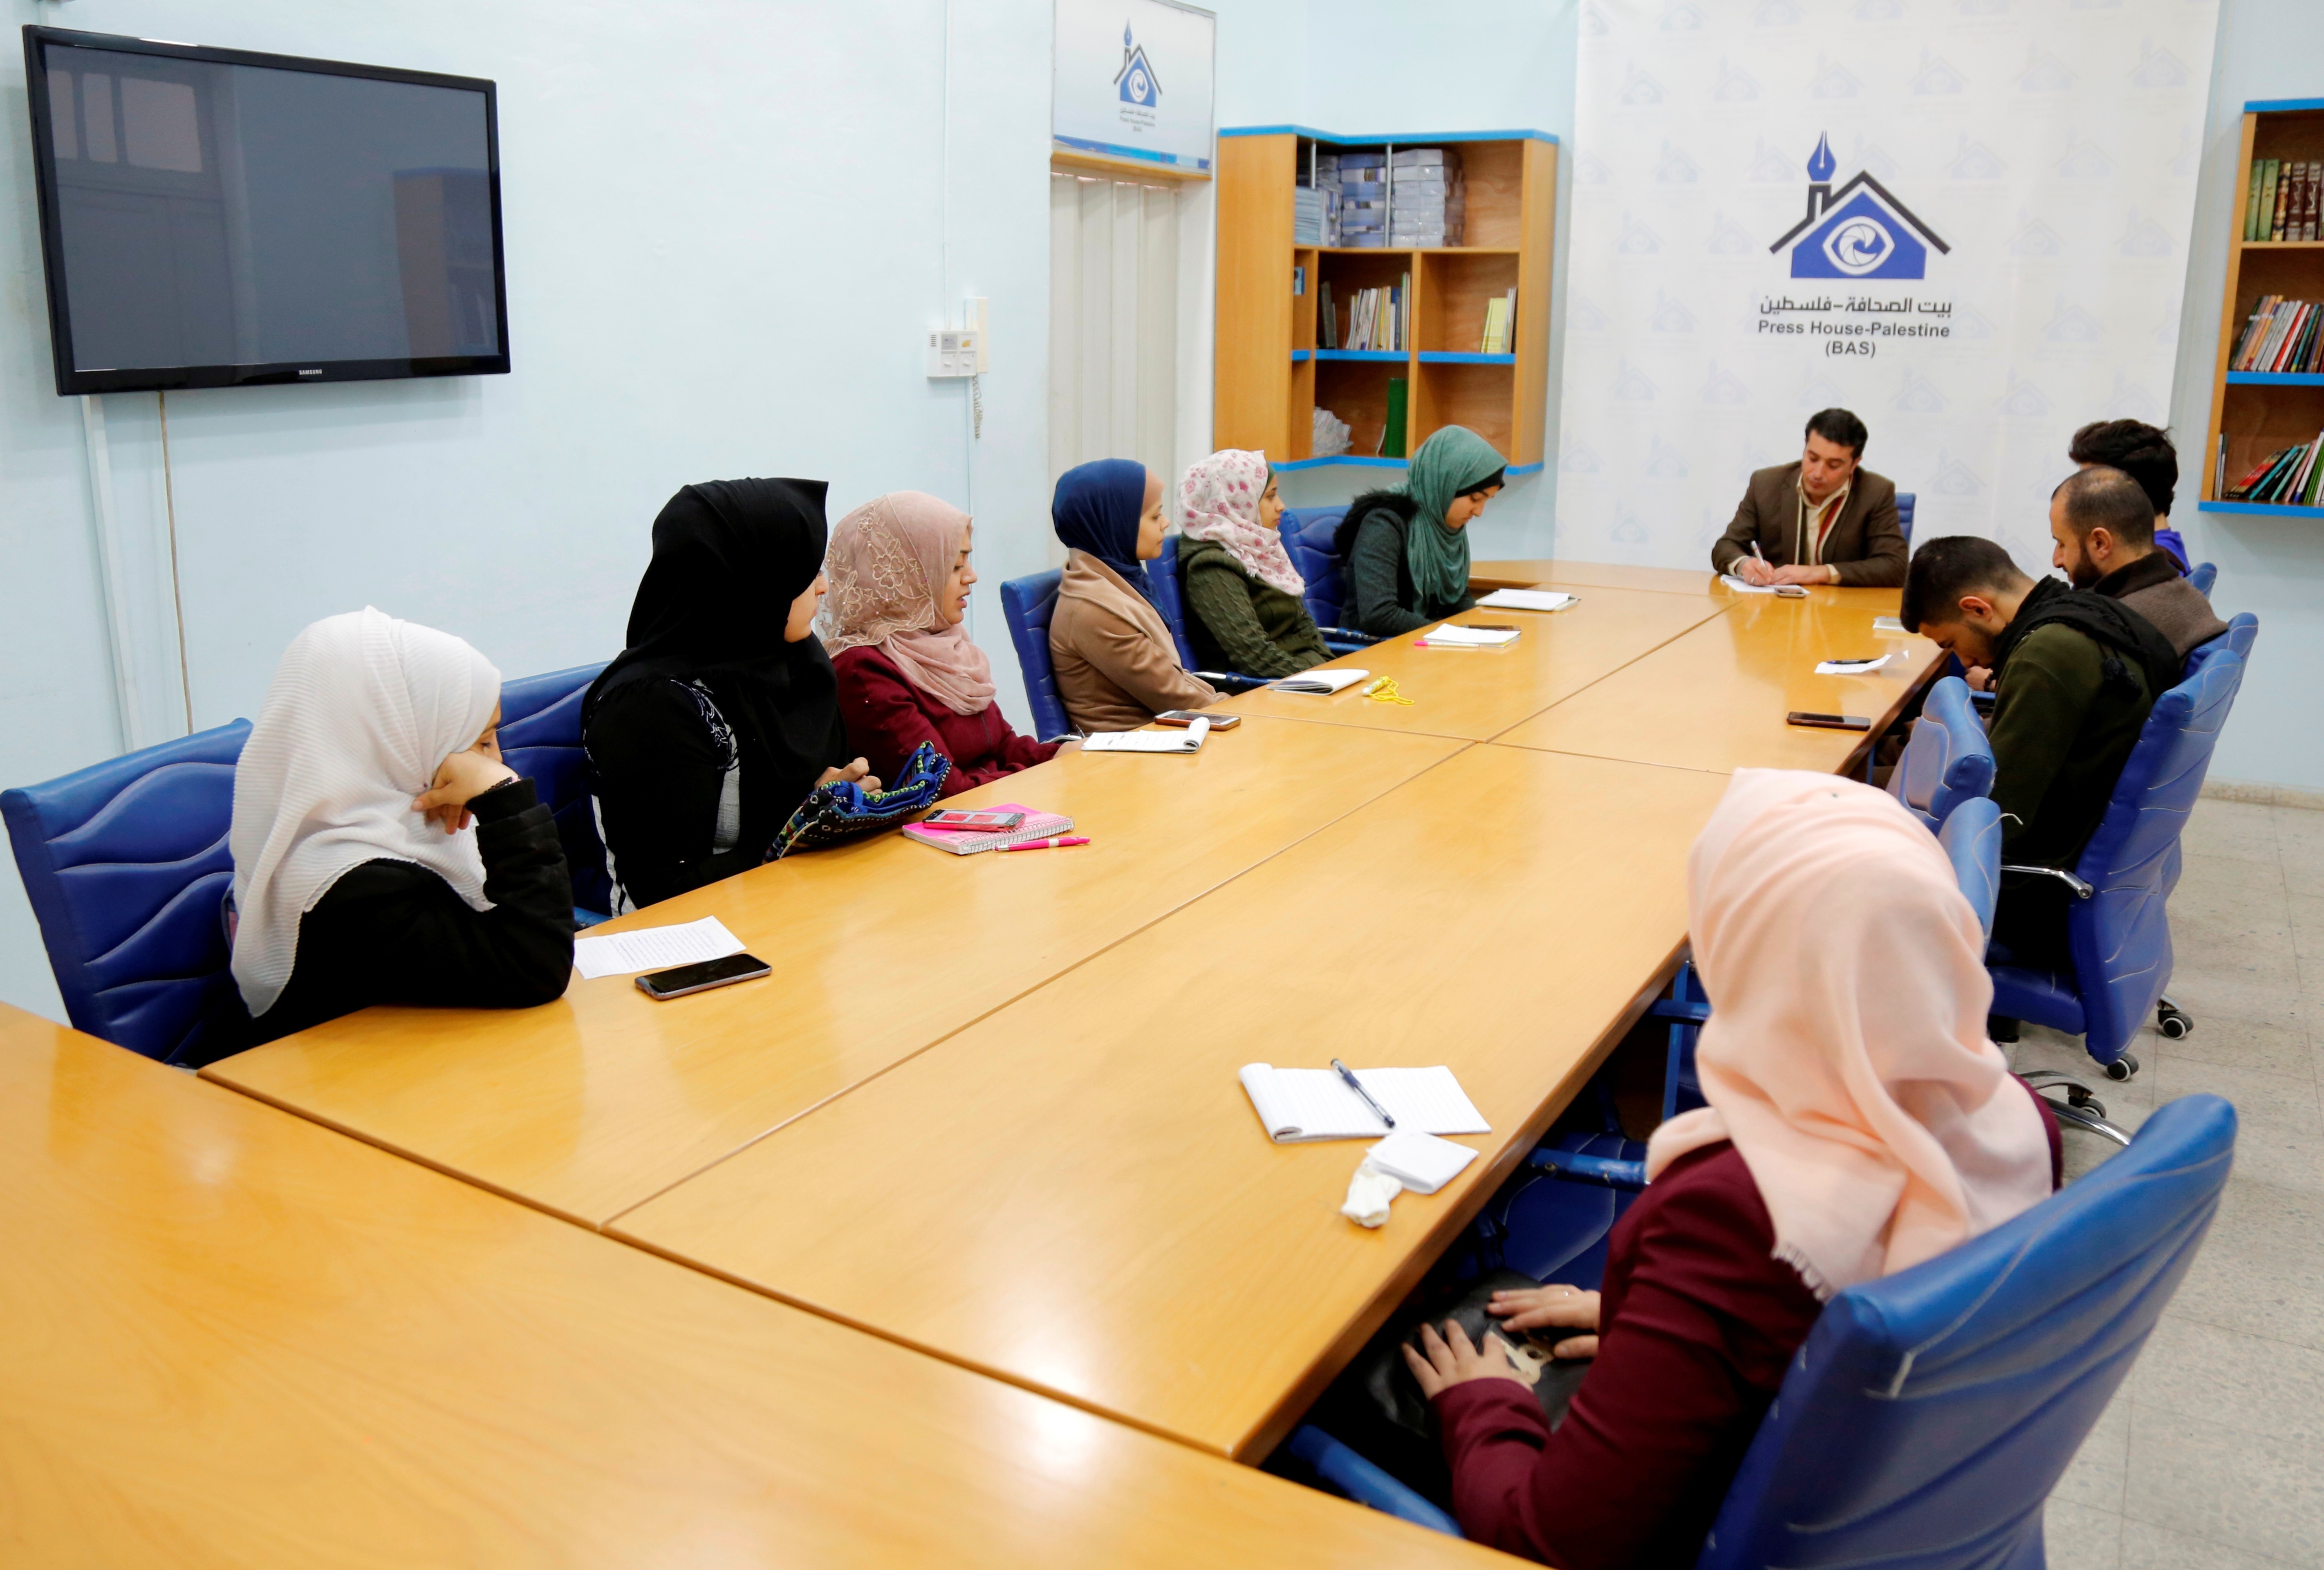 “ Journalists towards Excellence” team concludes a training course at the Press House